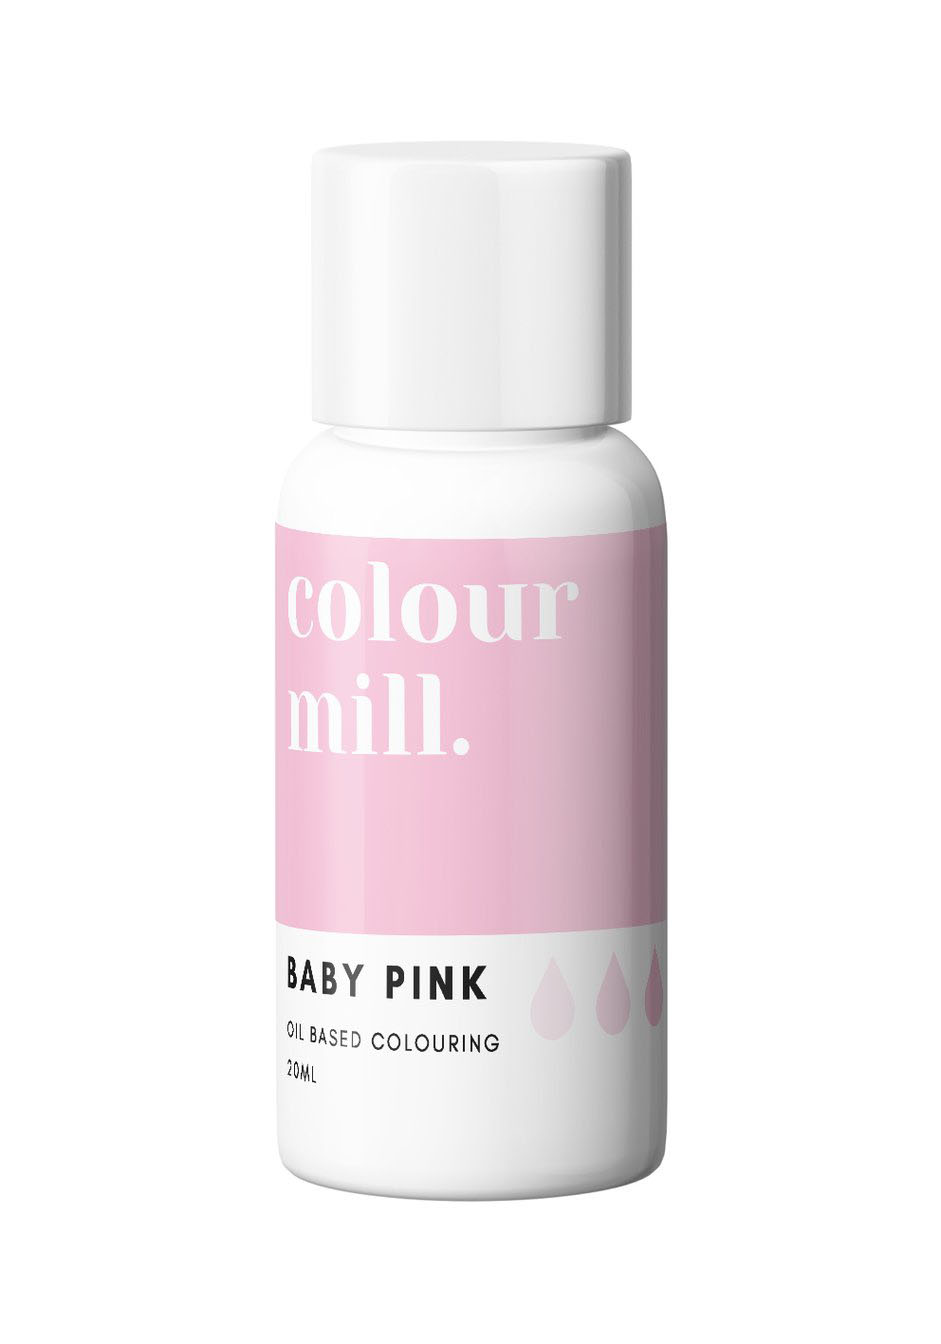 Colour Mill Baby Pink Colouring 20ml